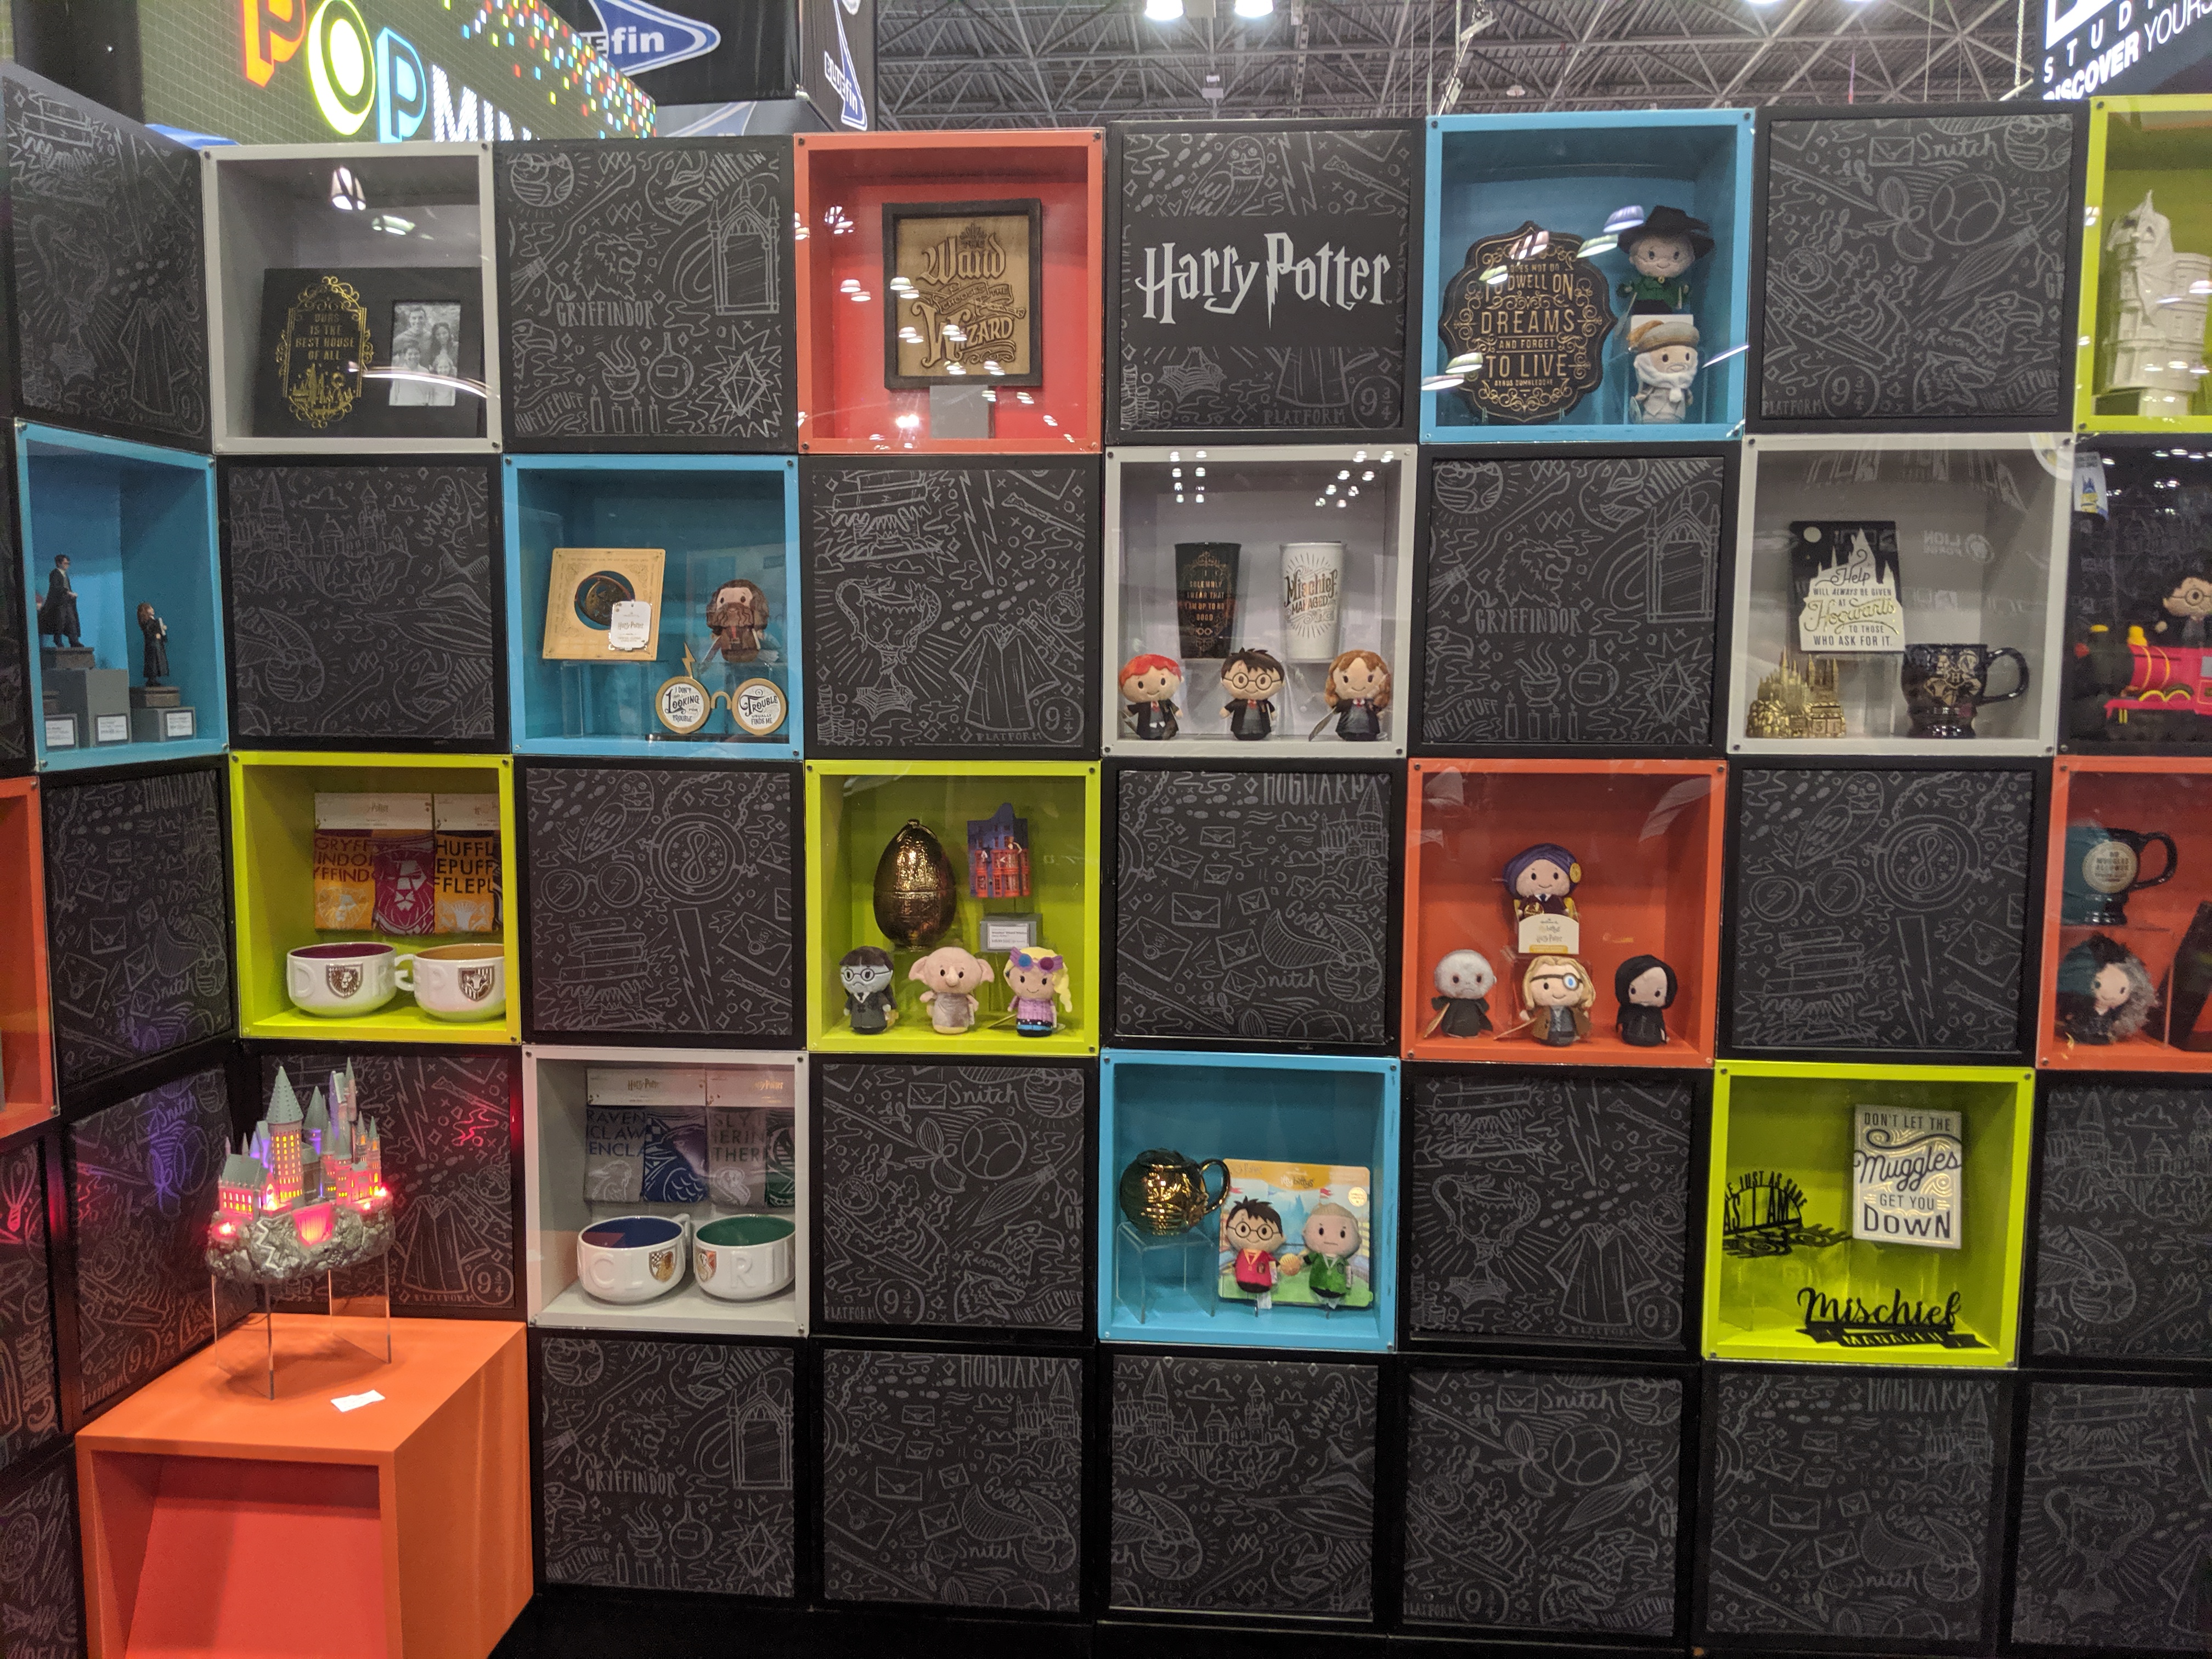 You’ll find an extensive collection of “Potter” merch at the PopMinded by Hallmark booth.